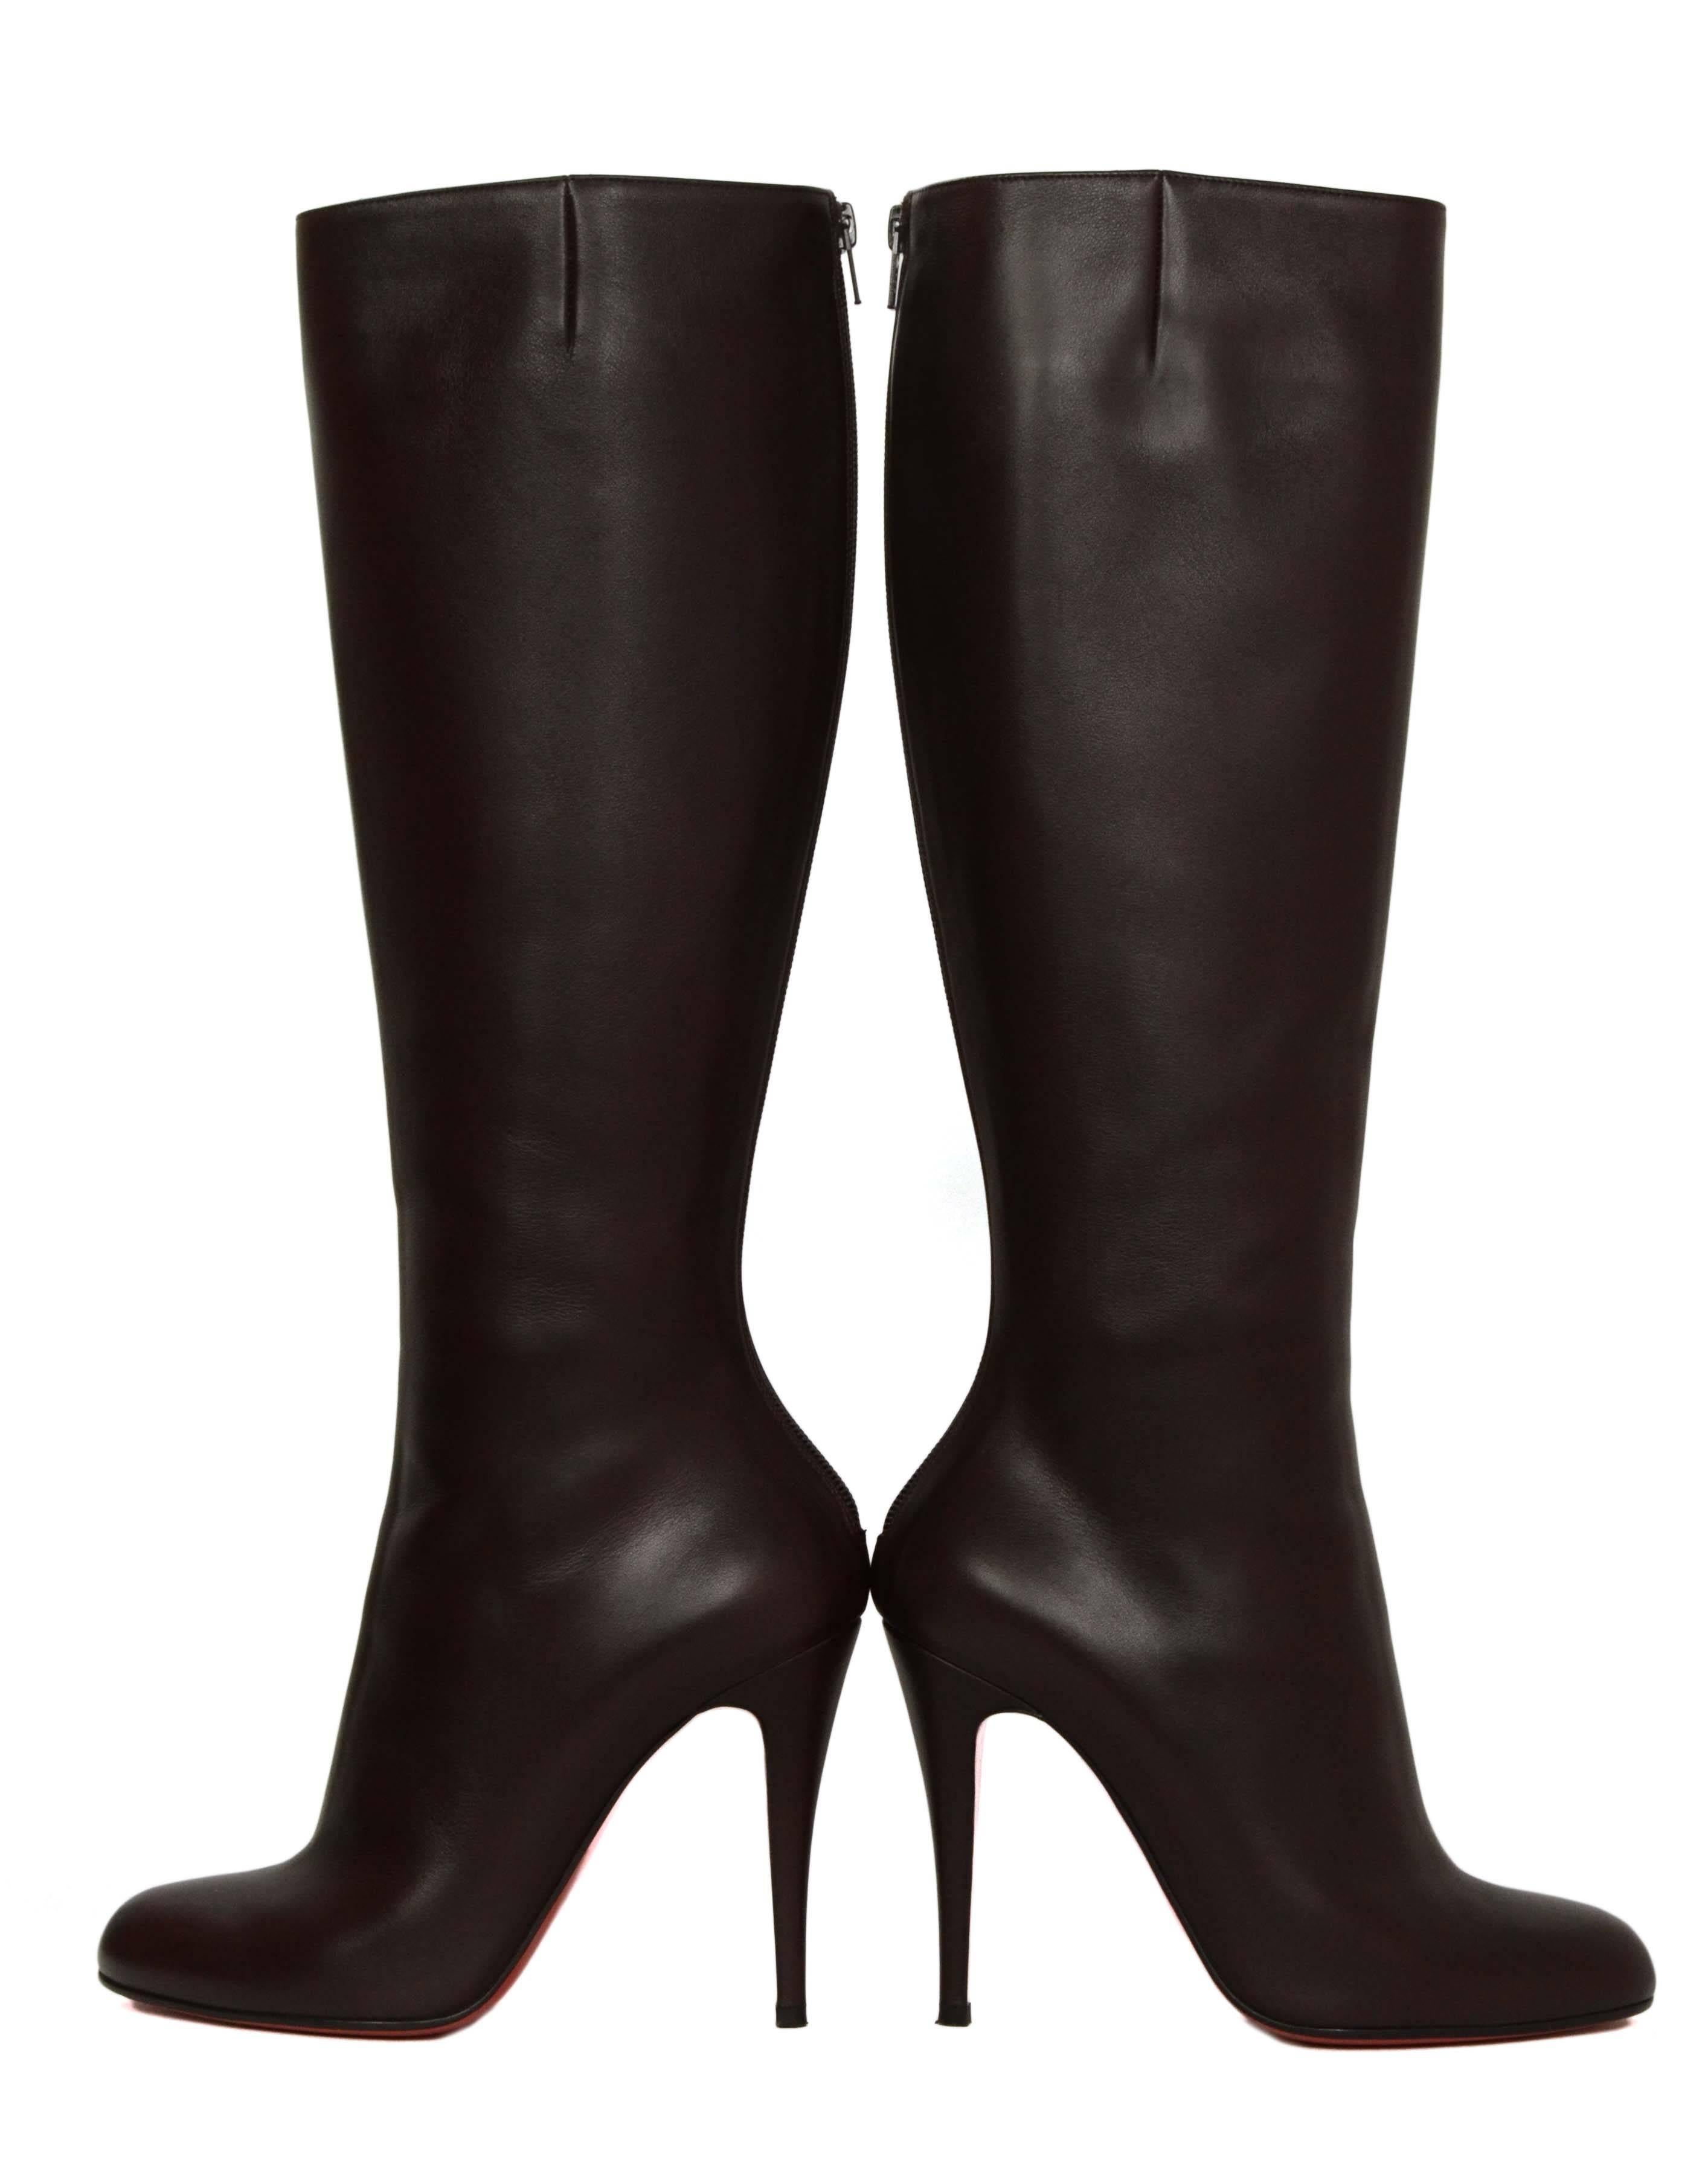 Christian Louboutin Brown Leather Babel 100 Tall Boots sz 38.5 rt. $1, 495 2